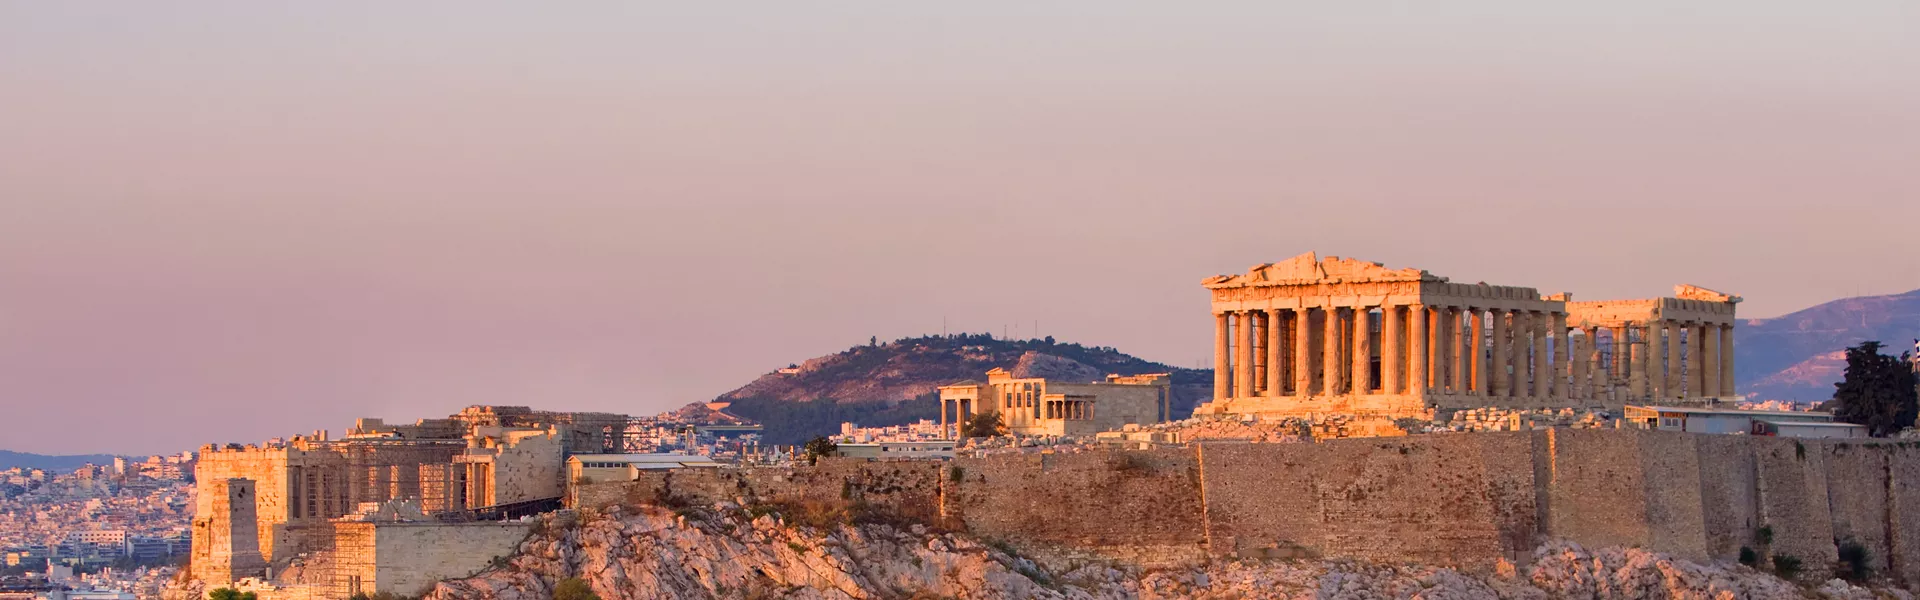 Greece Guided Tours and Travel Guide